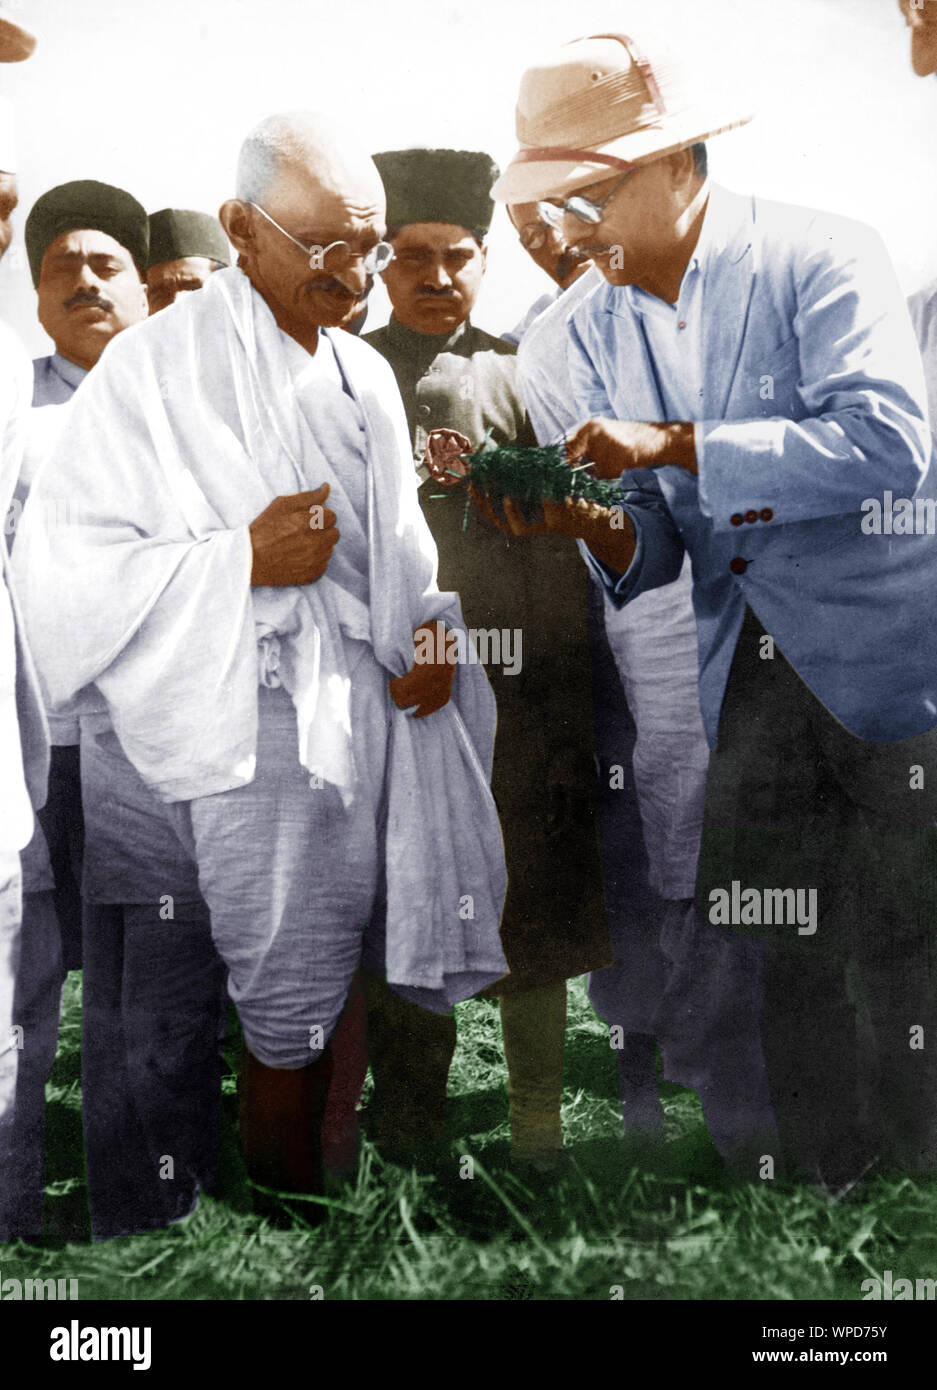 Mahatma Gandhi getting farm compost shown, explained by farm superintendent, India, Asia, 1930 Stock Photo